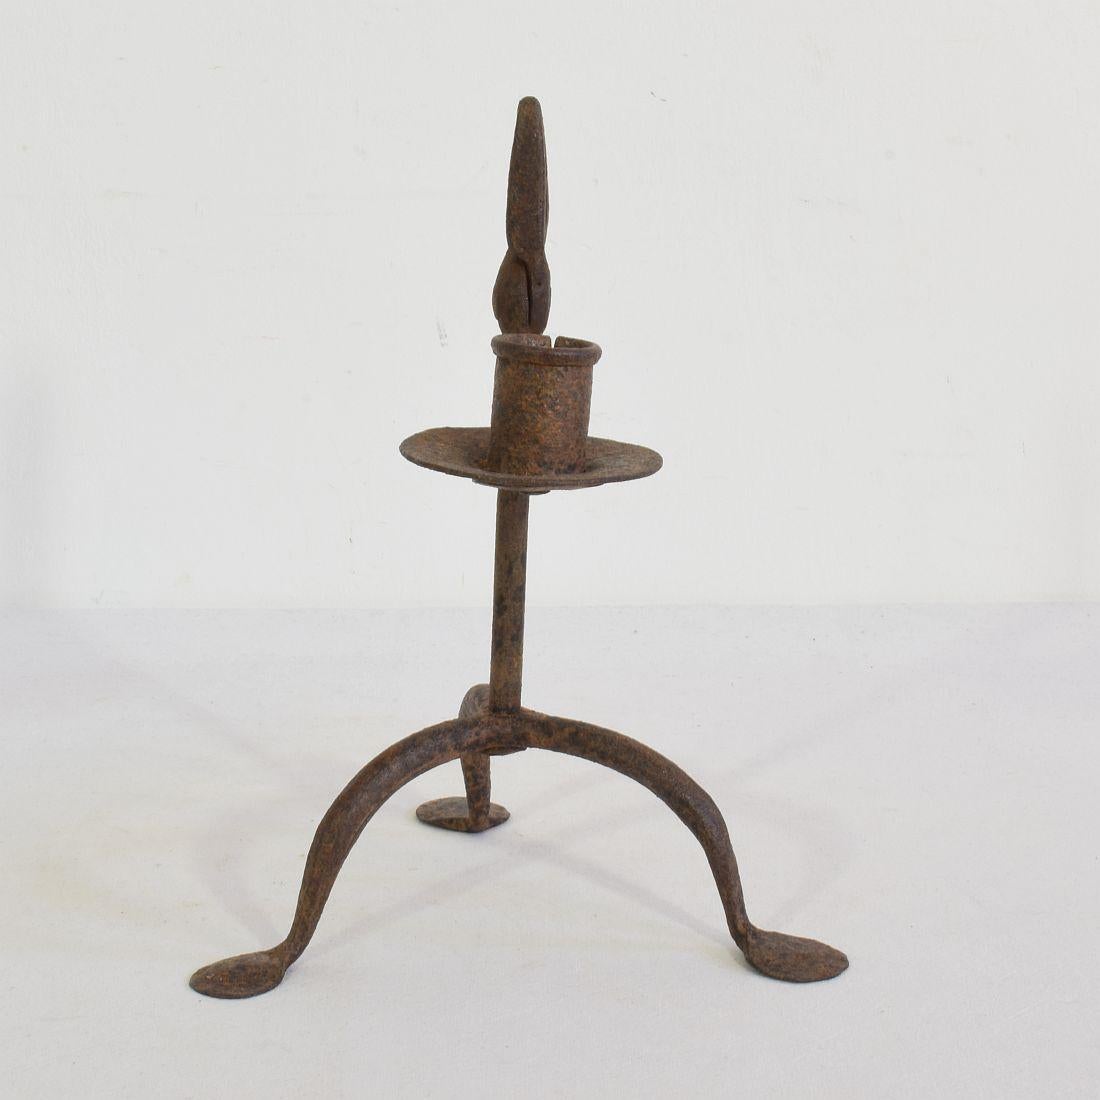 Spanish 18th-19th Century Hand Forged Iron Candleholder